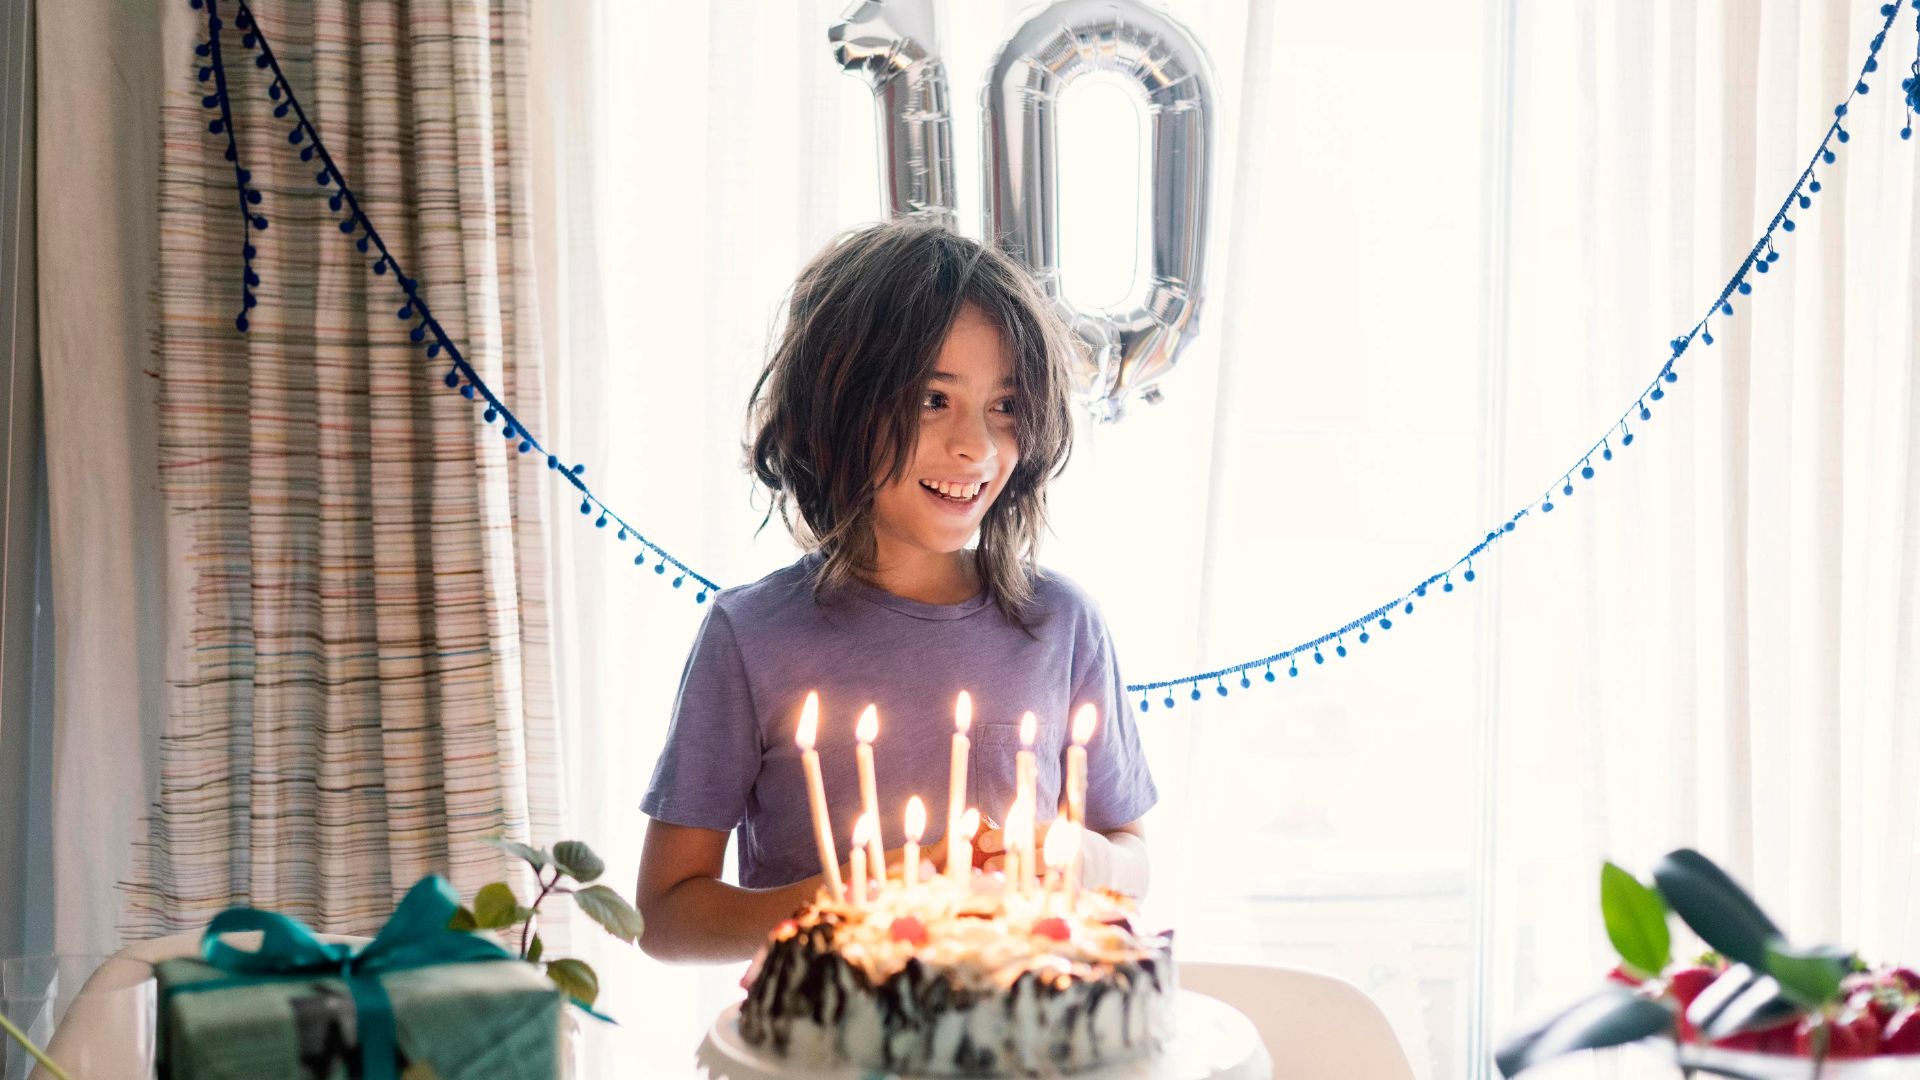 A Girl Holding A Cake With Candles On It